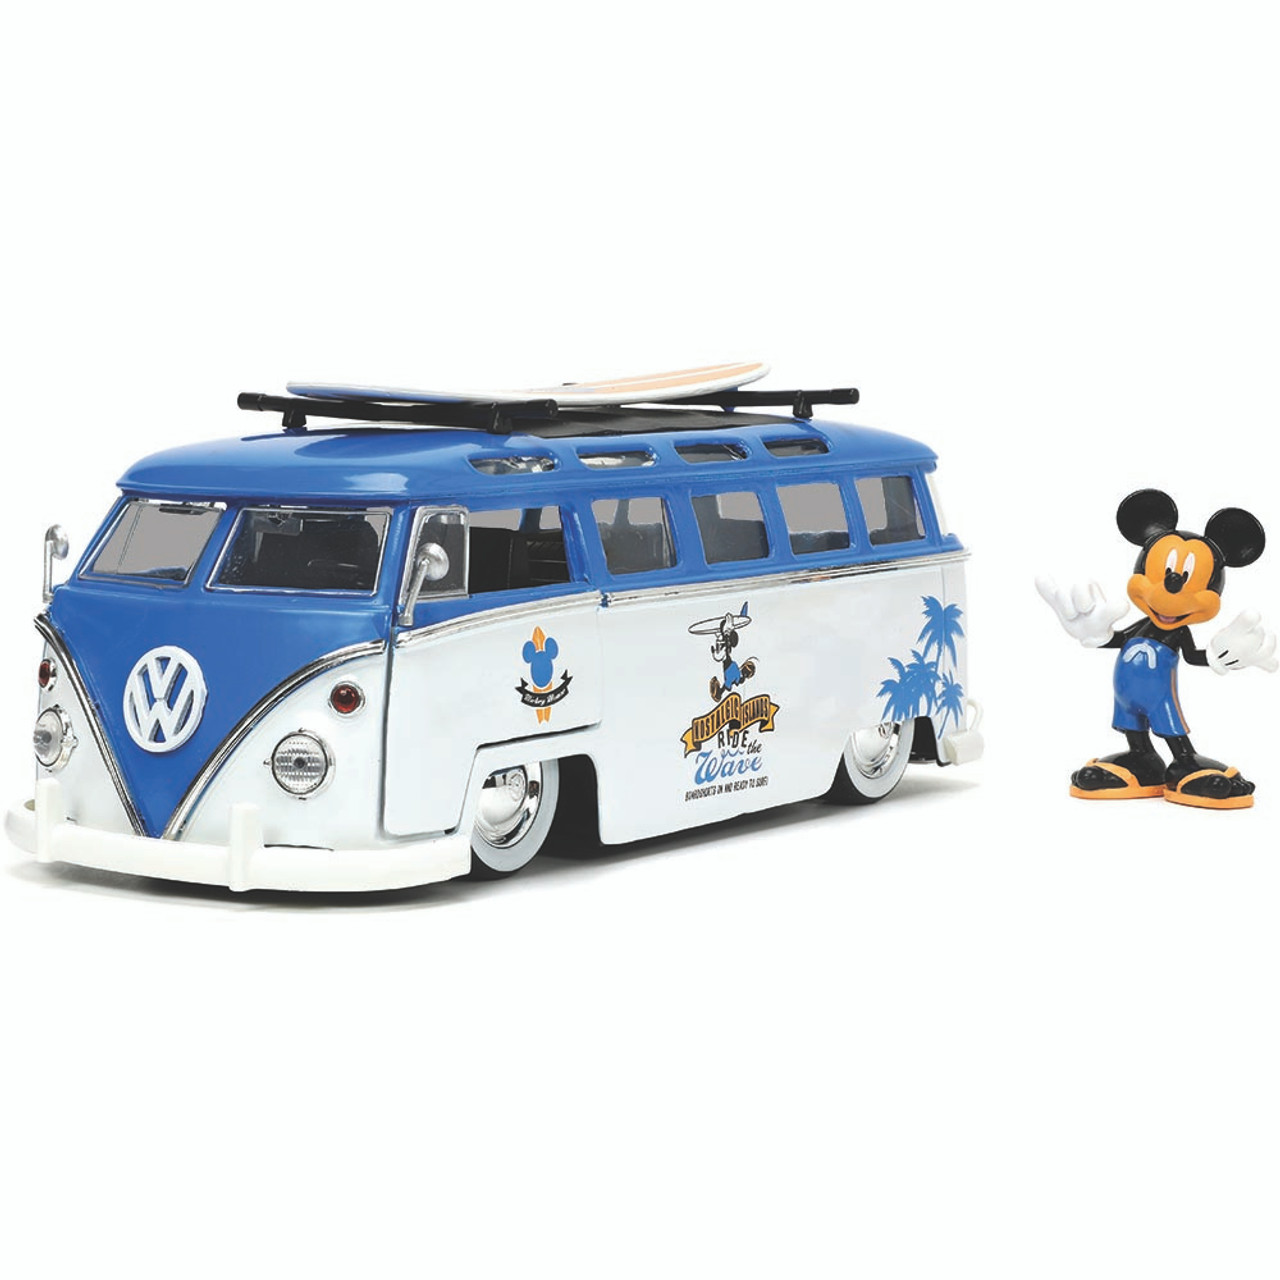 Rood Polijsten rollen 1962 VW Bus with Mickey Mouse Figure - Disney Hollywood Rides 1:24 Scale  Diecast Model by Jada Toys | Fairfield Collectibles